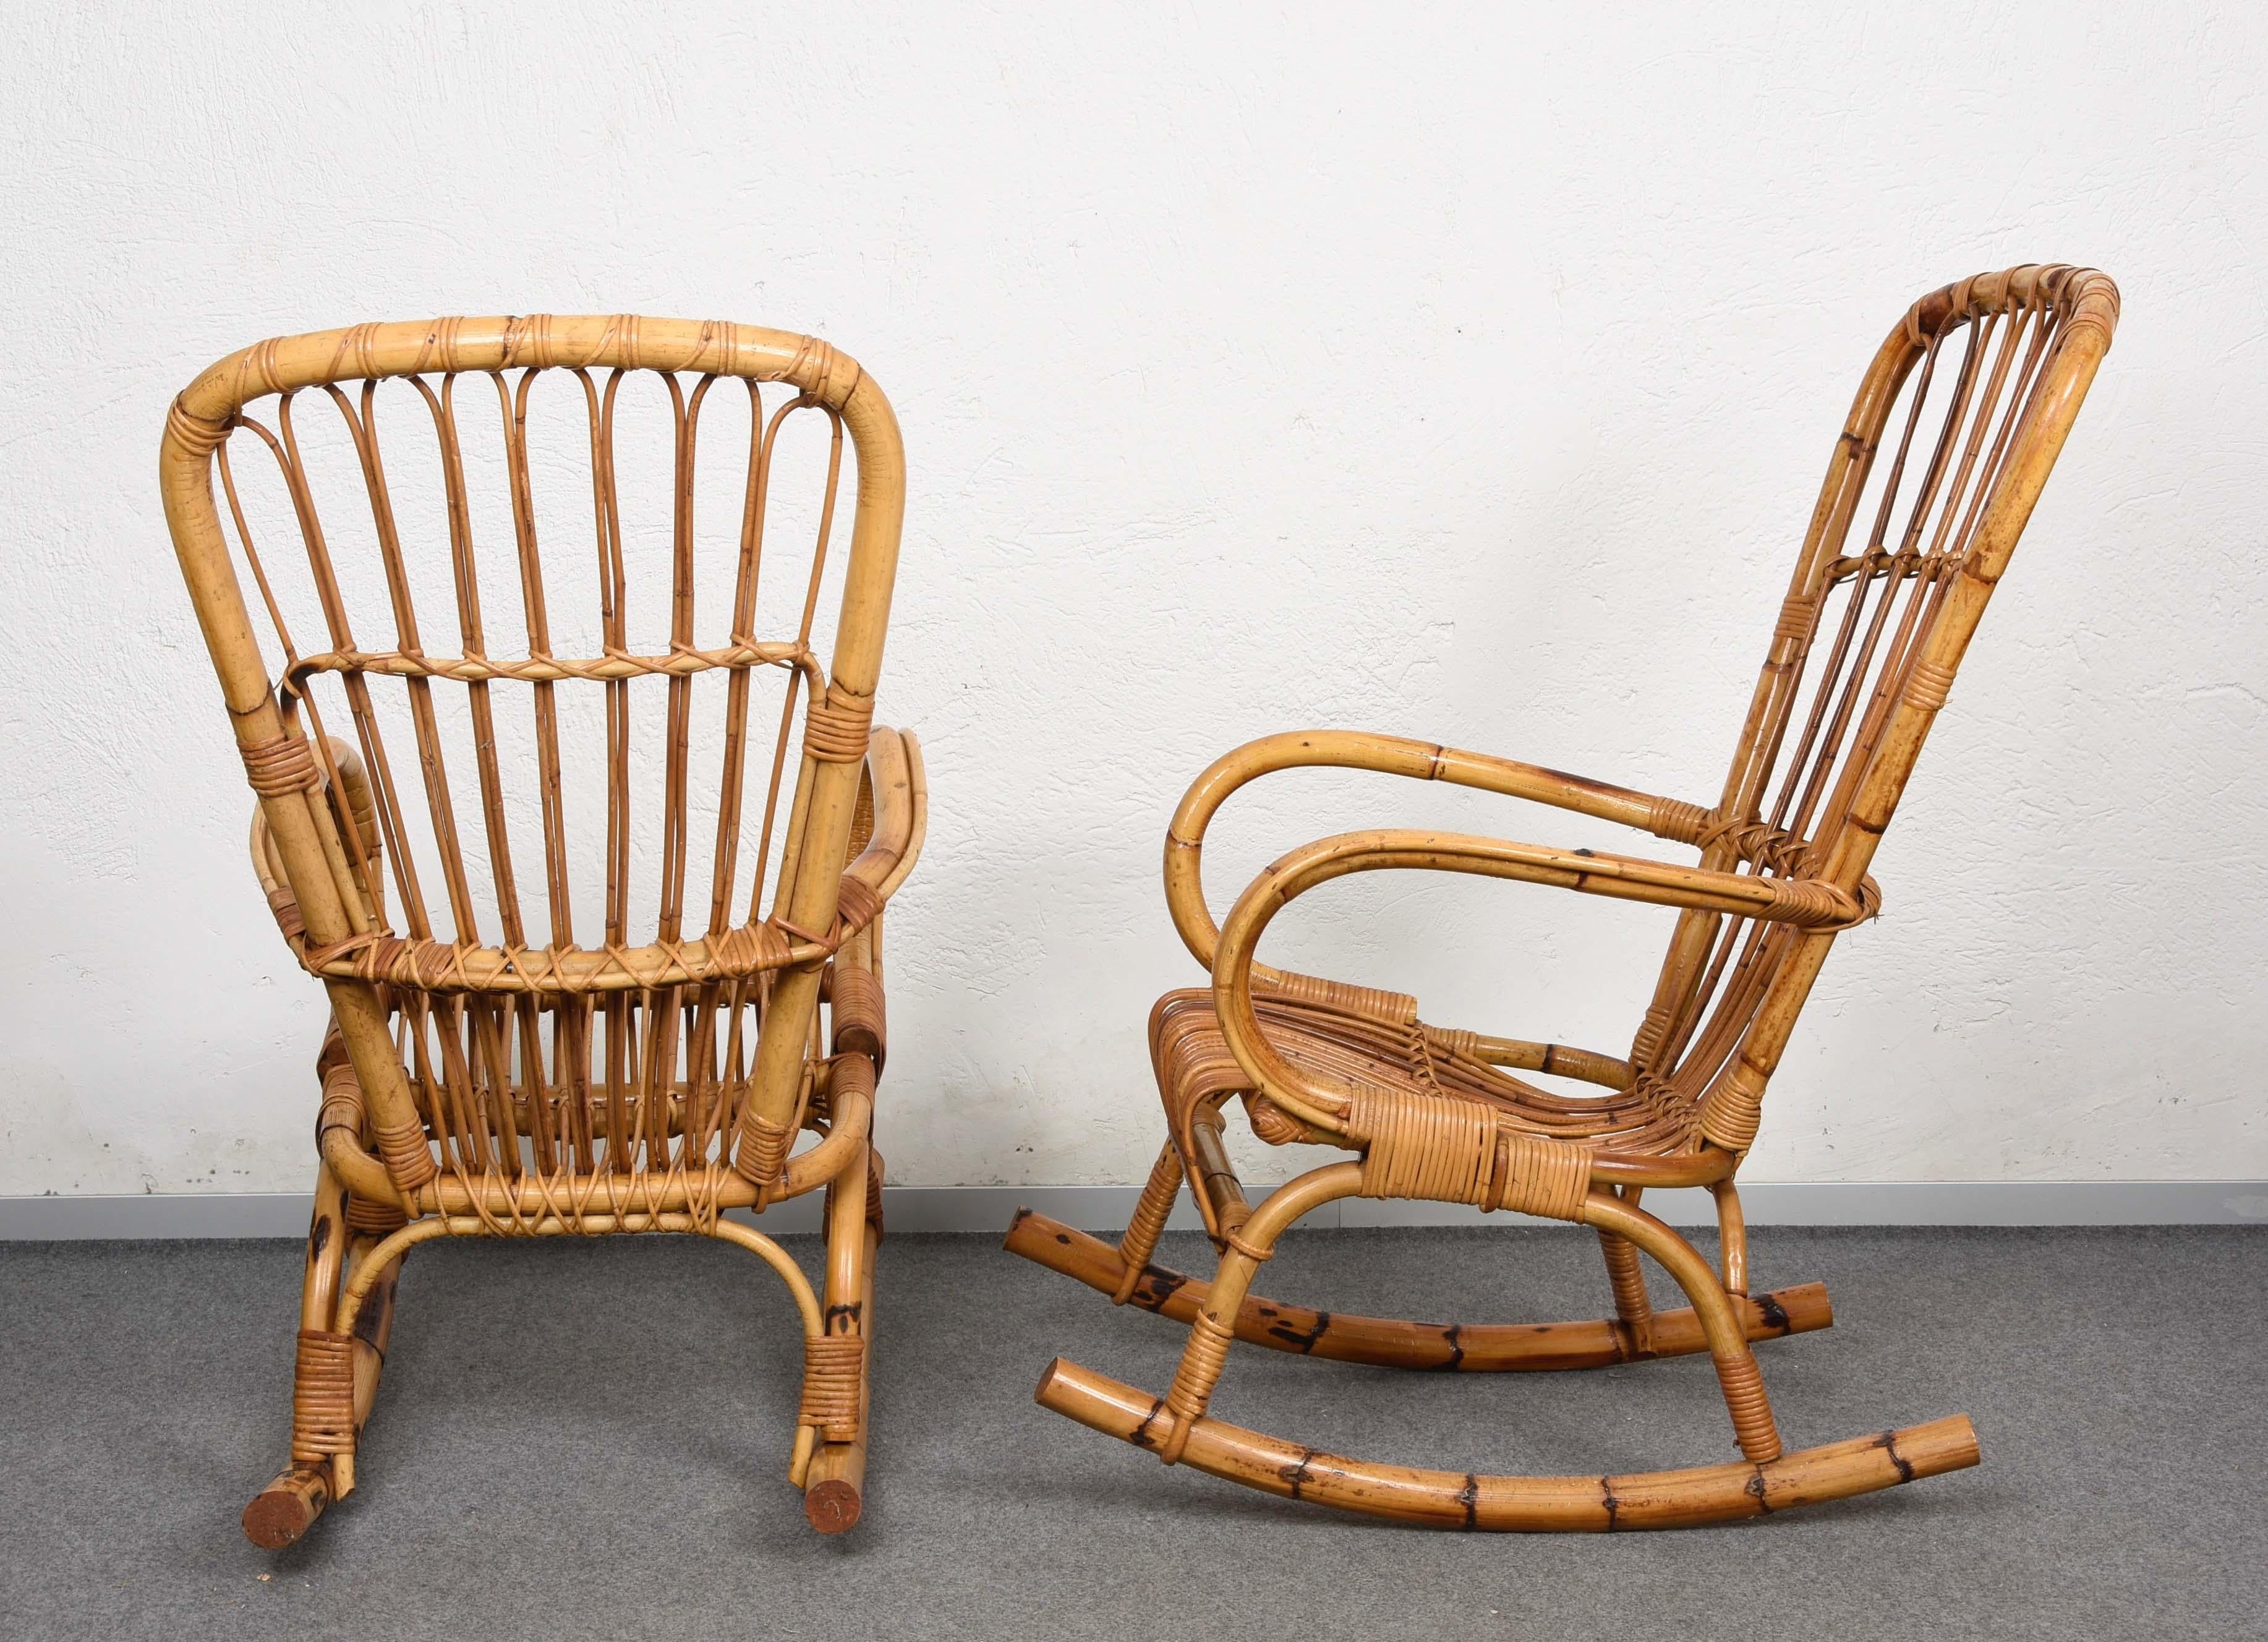 Pair of Midcentury Cote d'Azur Rattan and Bamboo Italian Rocking Chairs, 1960s For Sale 1